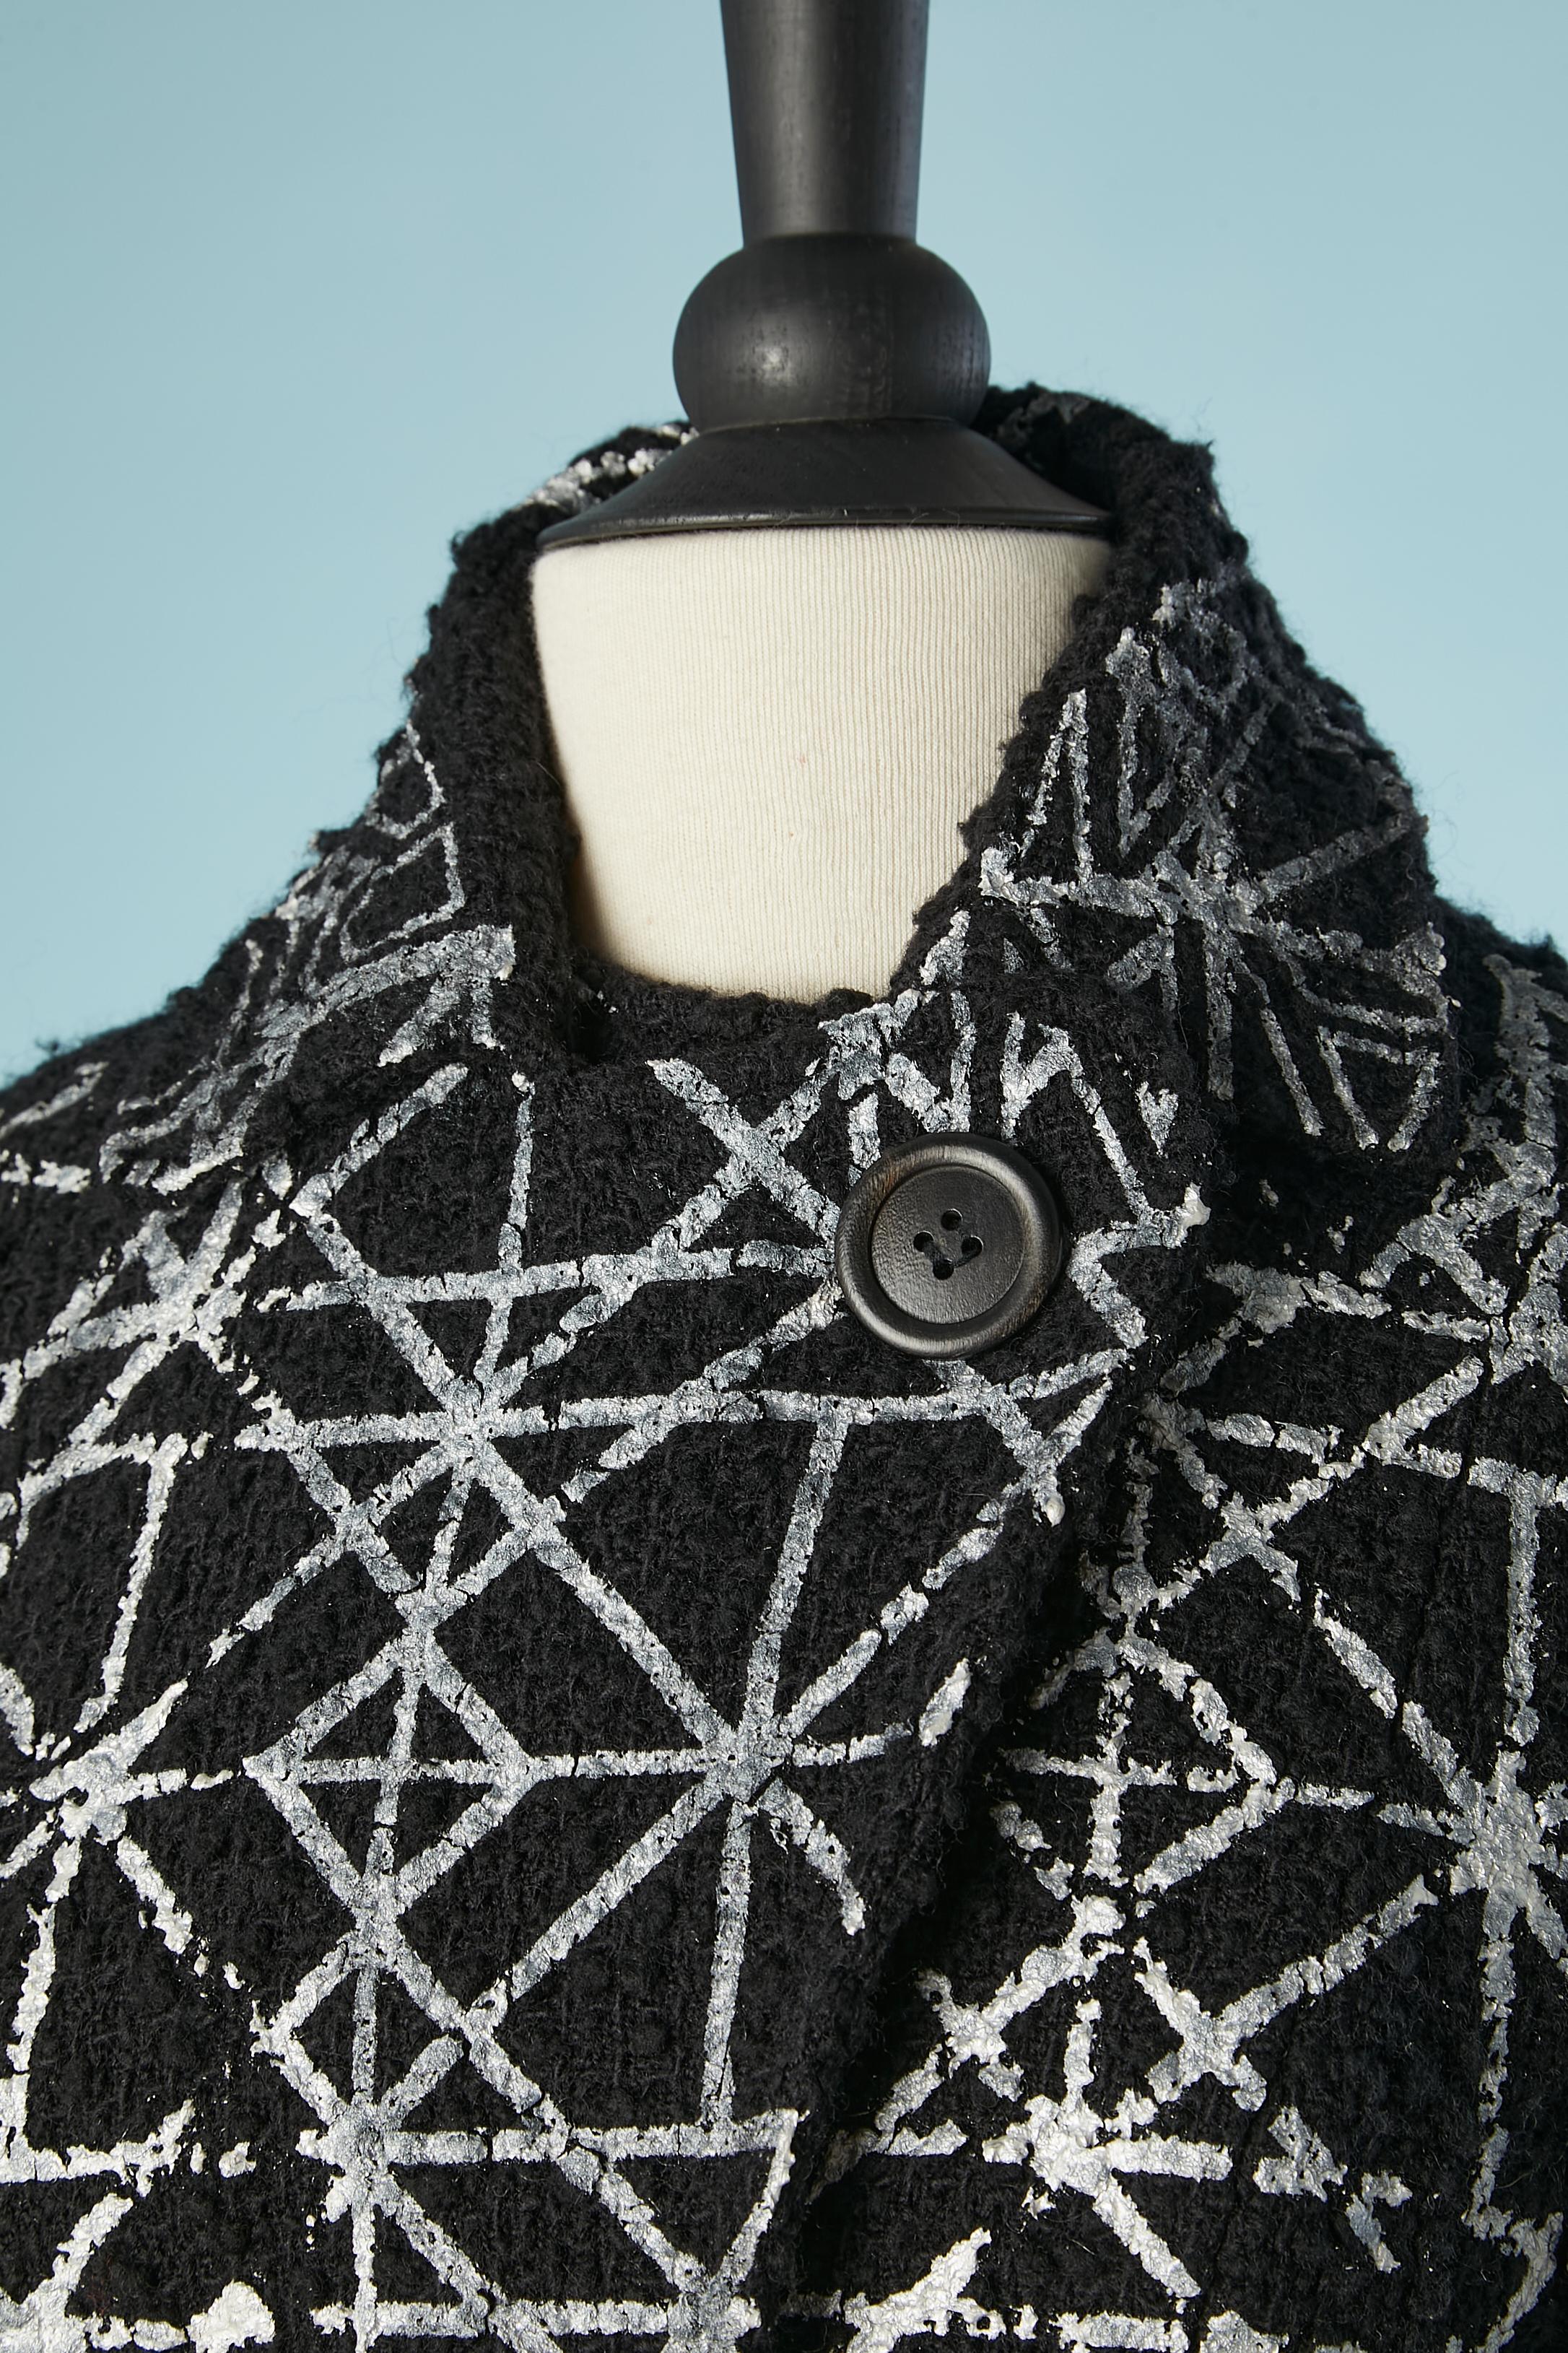 Black wool bouclette jacket with silver paint appliqué pattern. No fabric composition tag. White lining probably polyester. Half-belt in the front. 